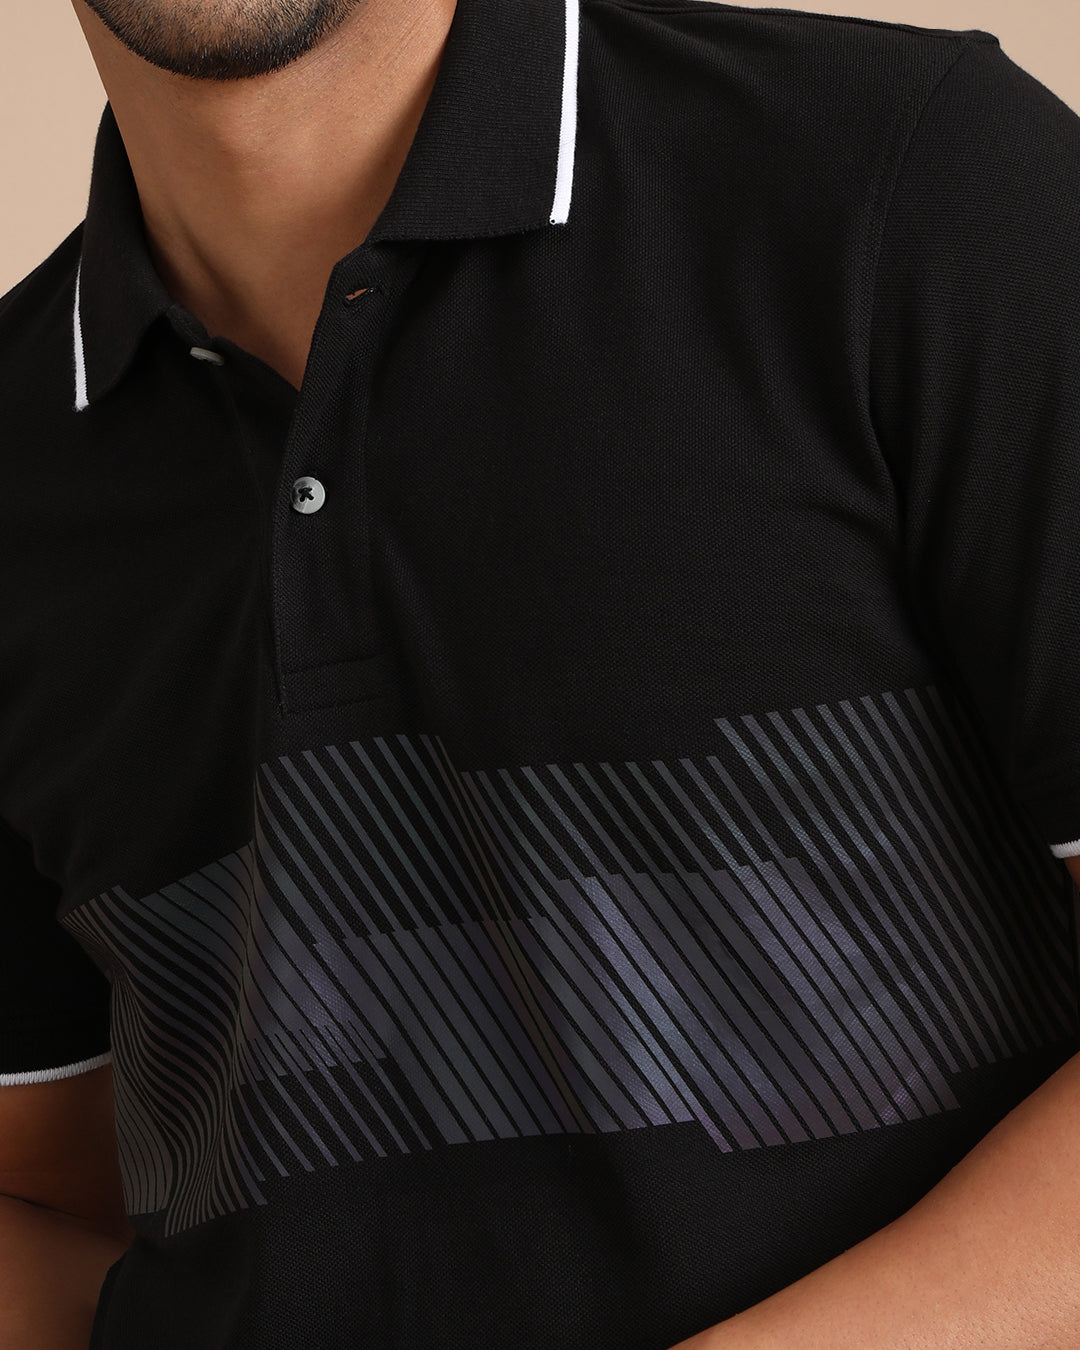 Enginereed Holographic Printed Polo T-Shirt